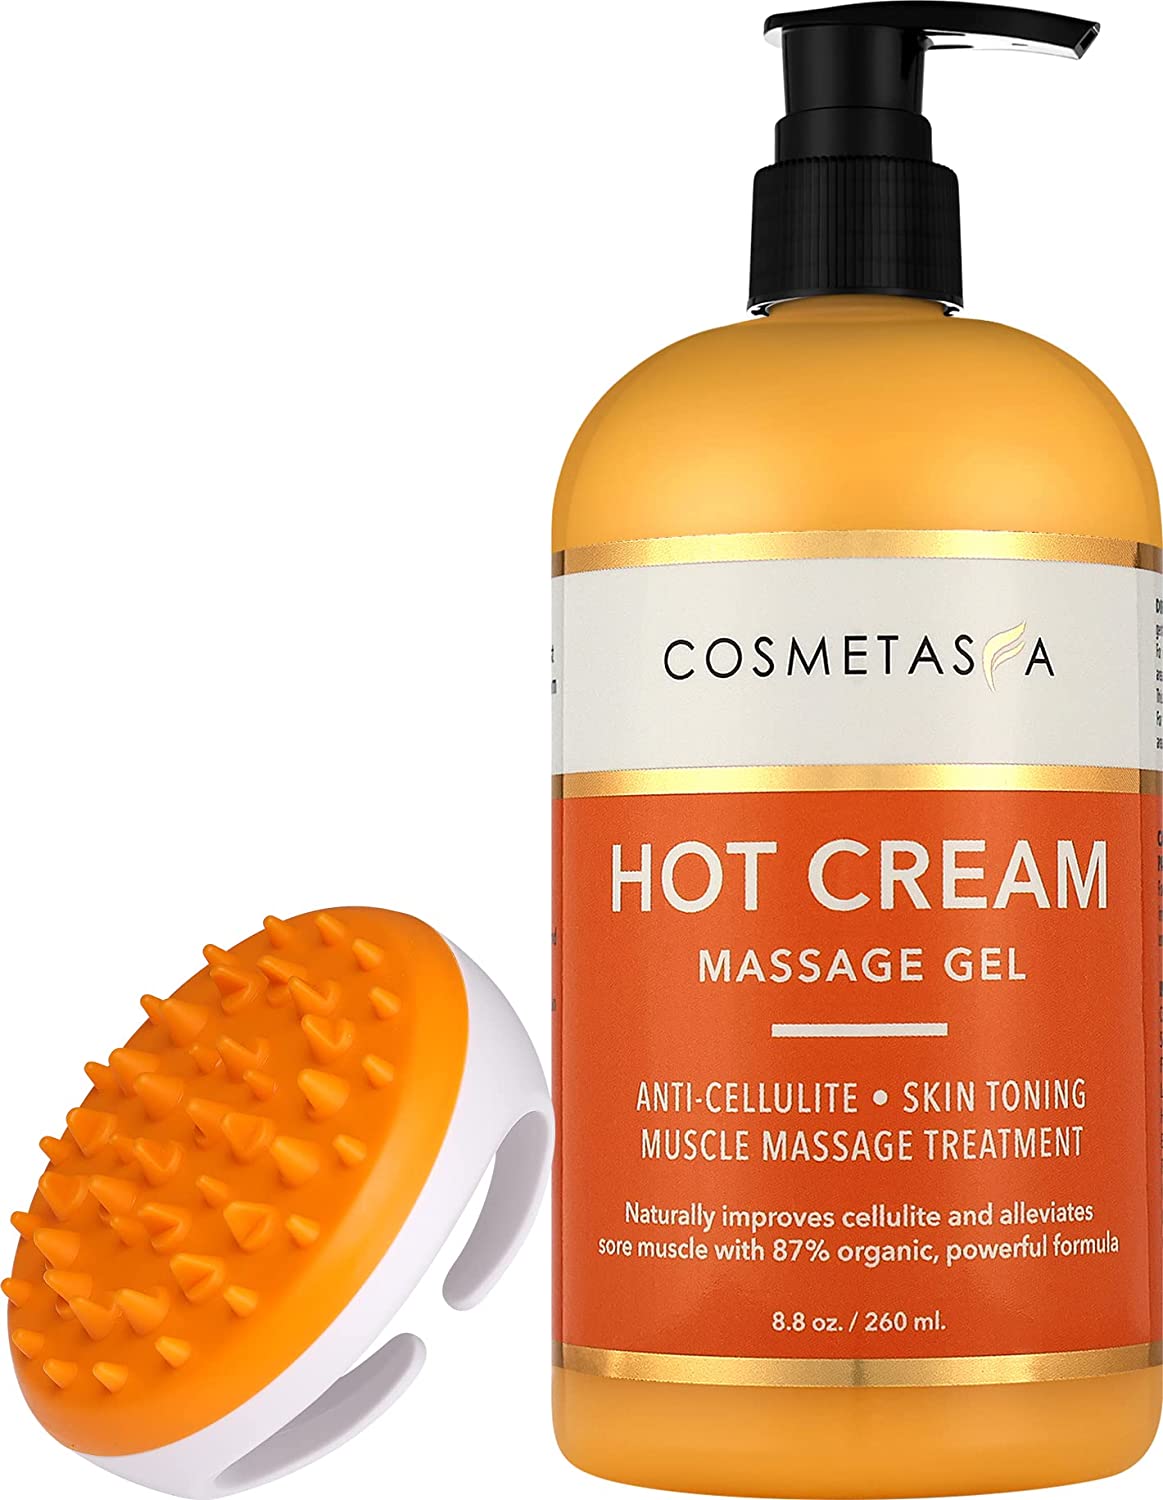 Review of Cosmetasa Hot Cream Massage Gel with Massager Mitt- Natural and 87% Organic Cellulite Cream